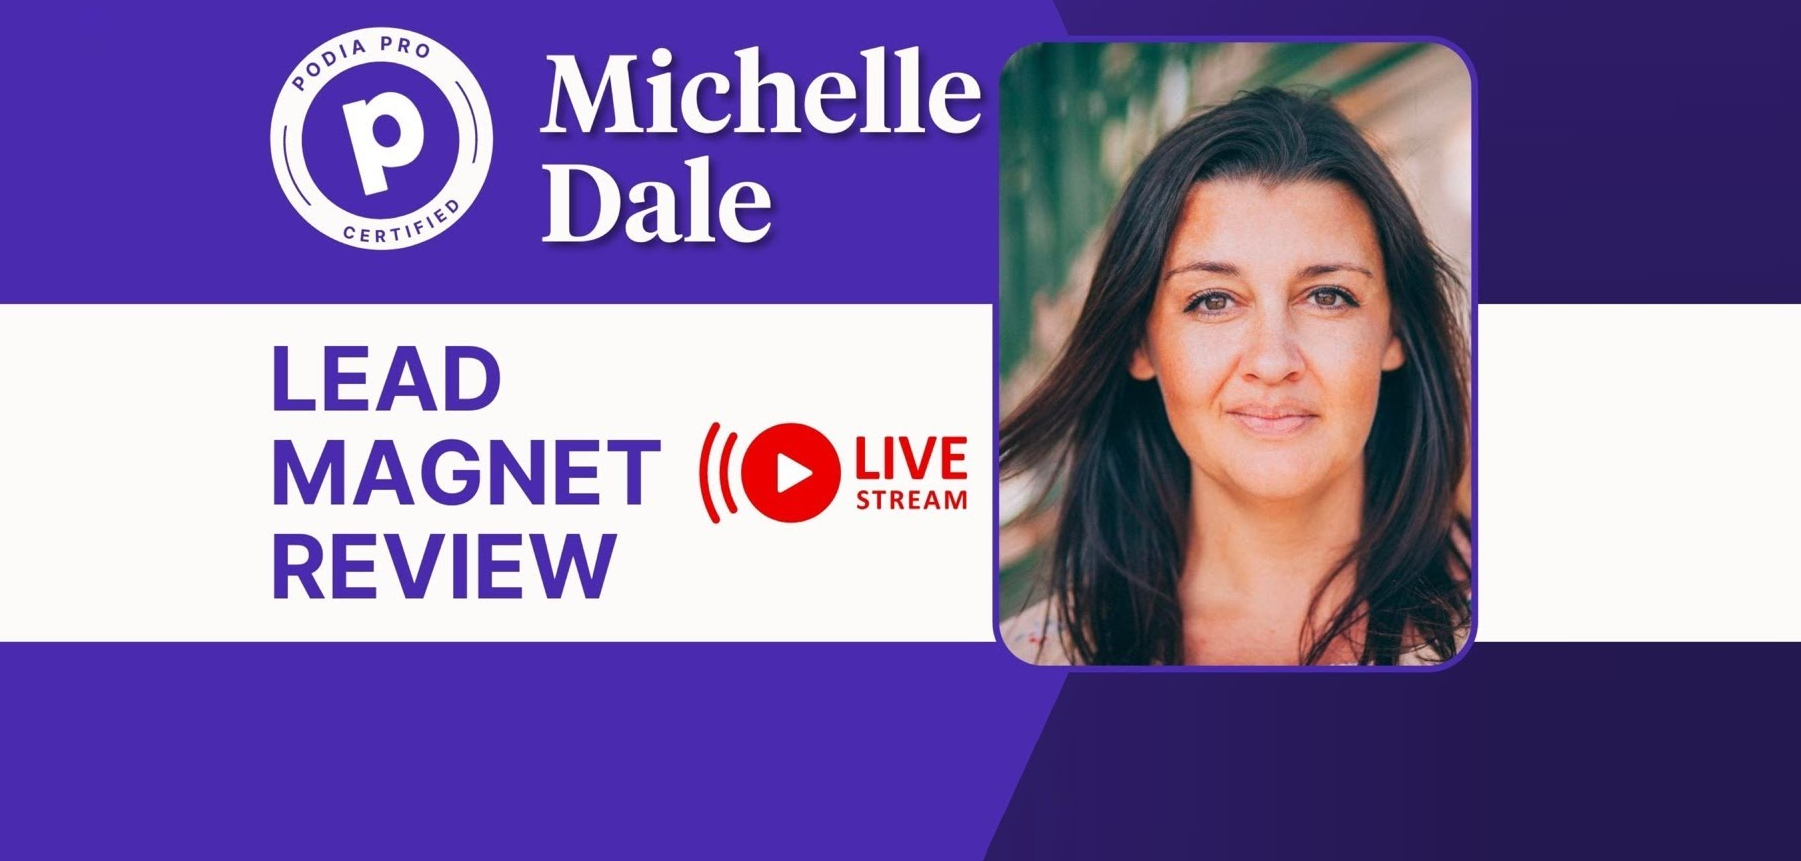 Lead magnet reviews with Michelle Dale